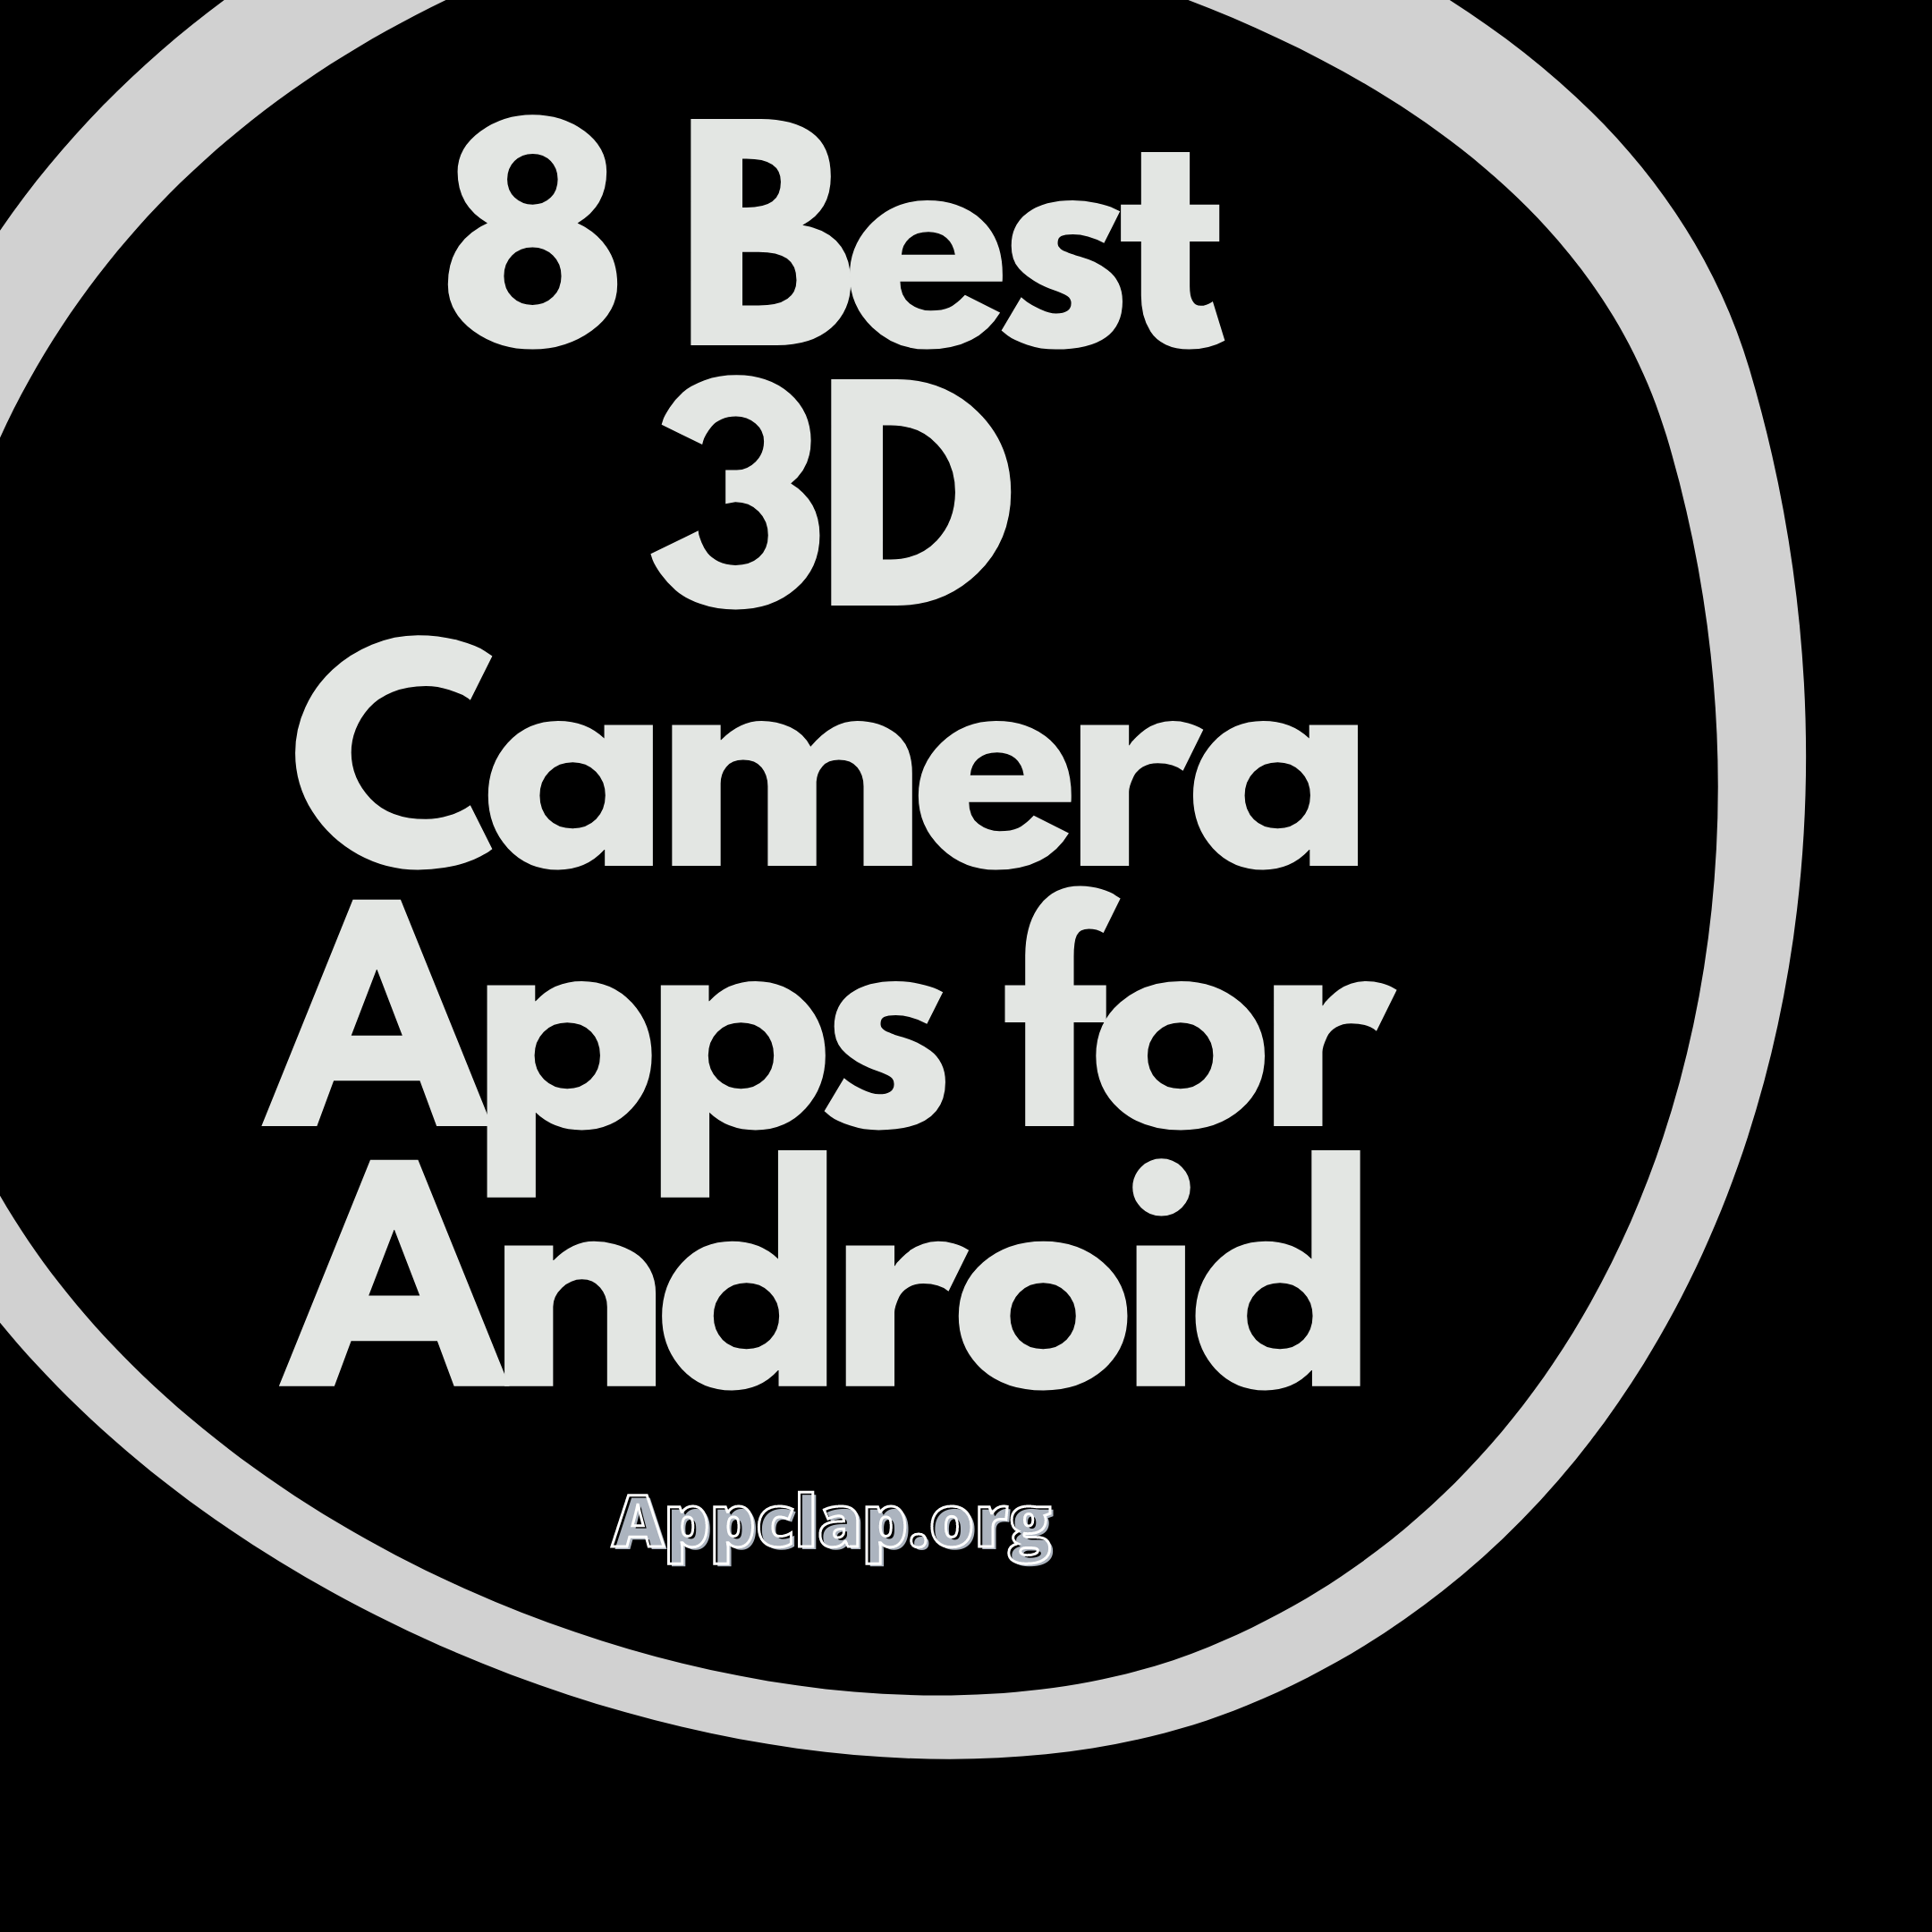 8 Best 3D Camera Apps for Android